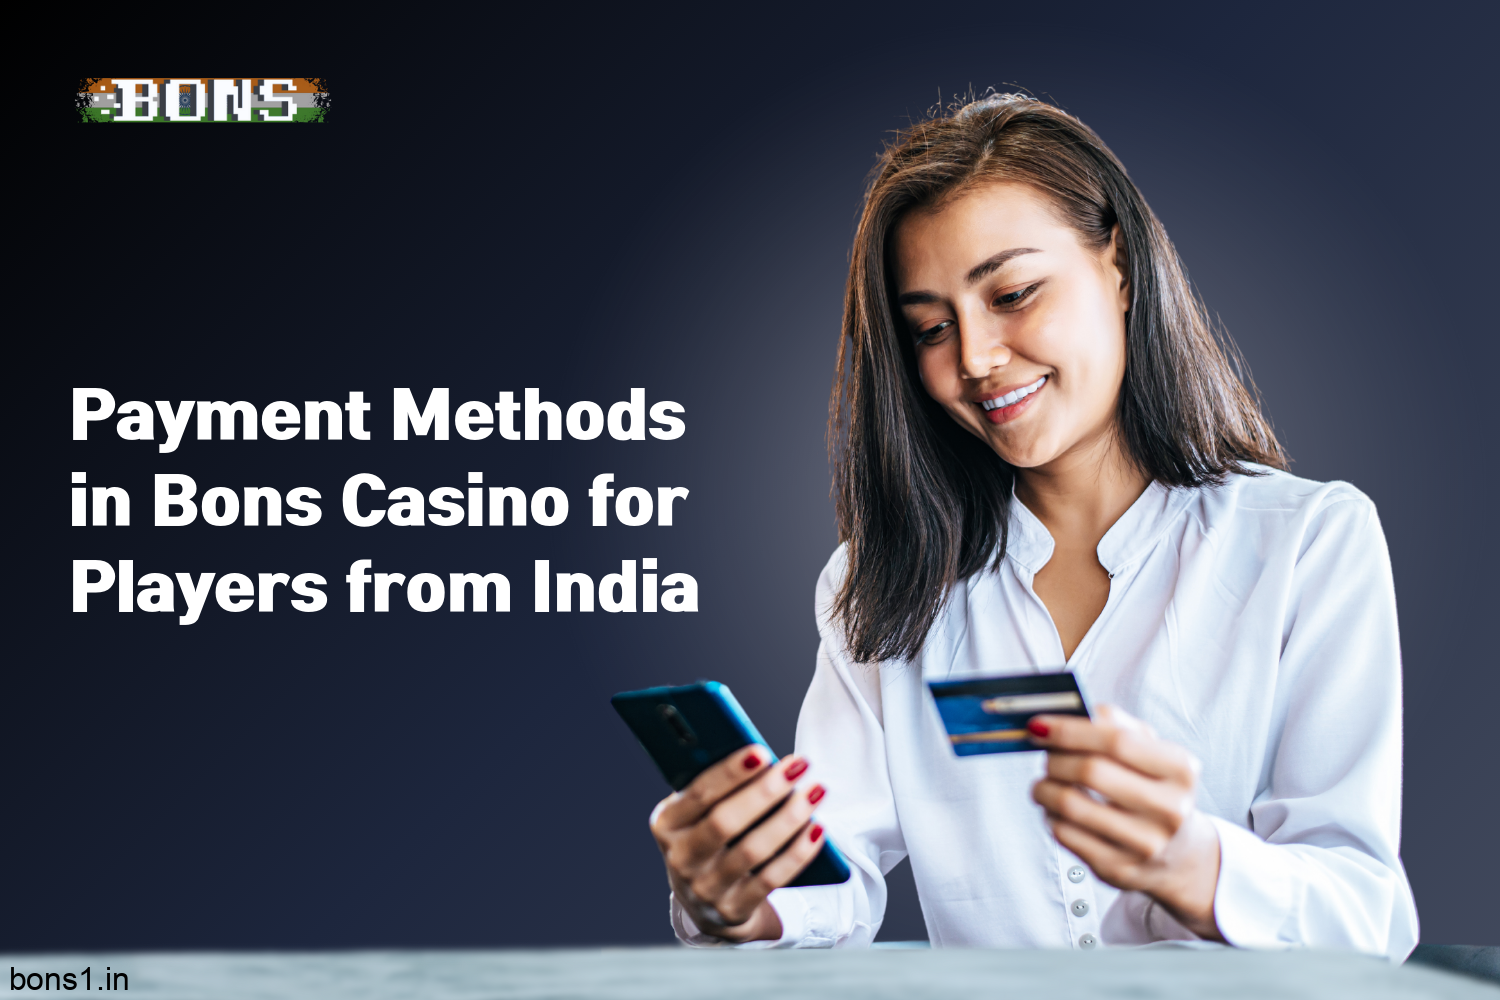 Bons Casino has a wide range of payment methods for players from India